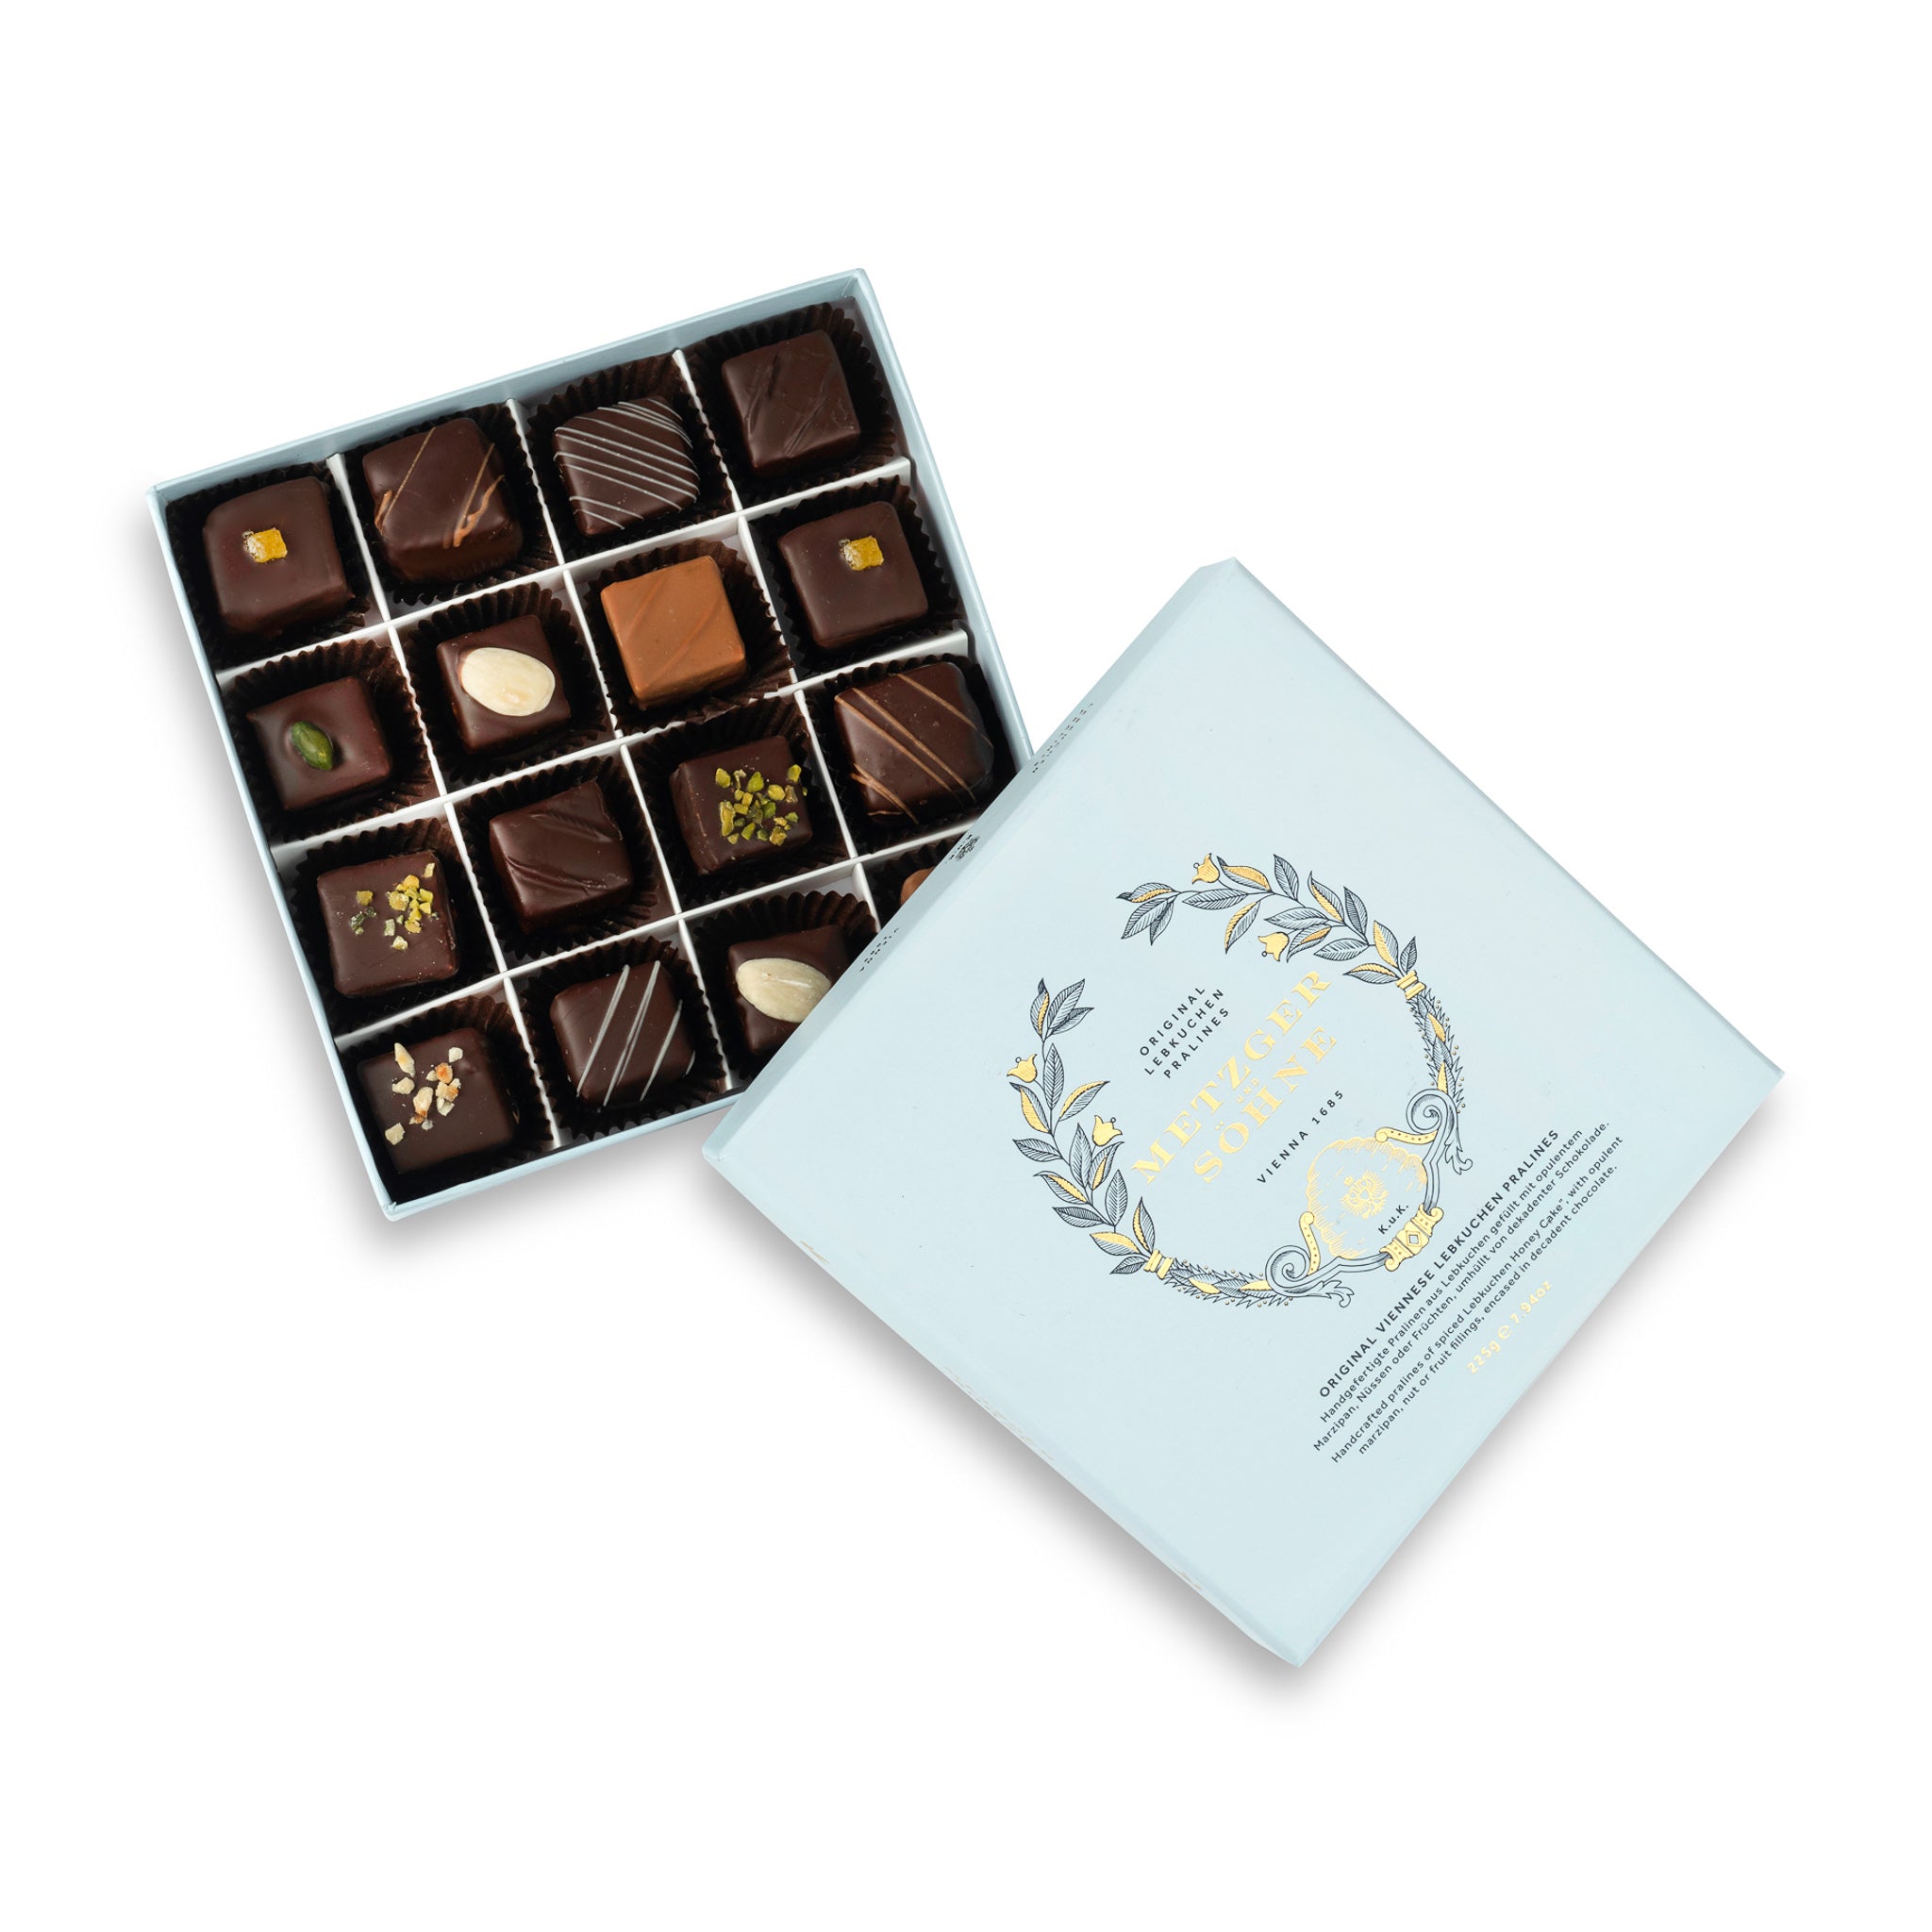 The Metzger signature praline box is filled with 16 high-quality, tastefully decorated gingerbread pralines in an appealing pattern. The gingerbread chocolates are filled with fine layers of the original mild Metzger gingerbread as well as different kinds of marzipan, fruits, nuts and jelly.